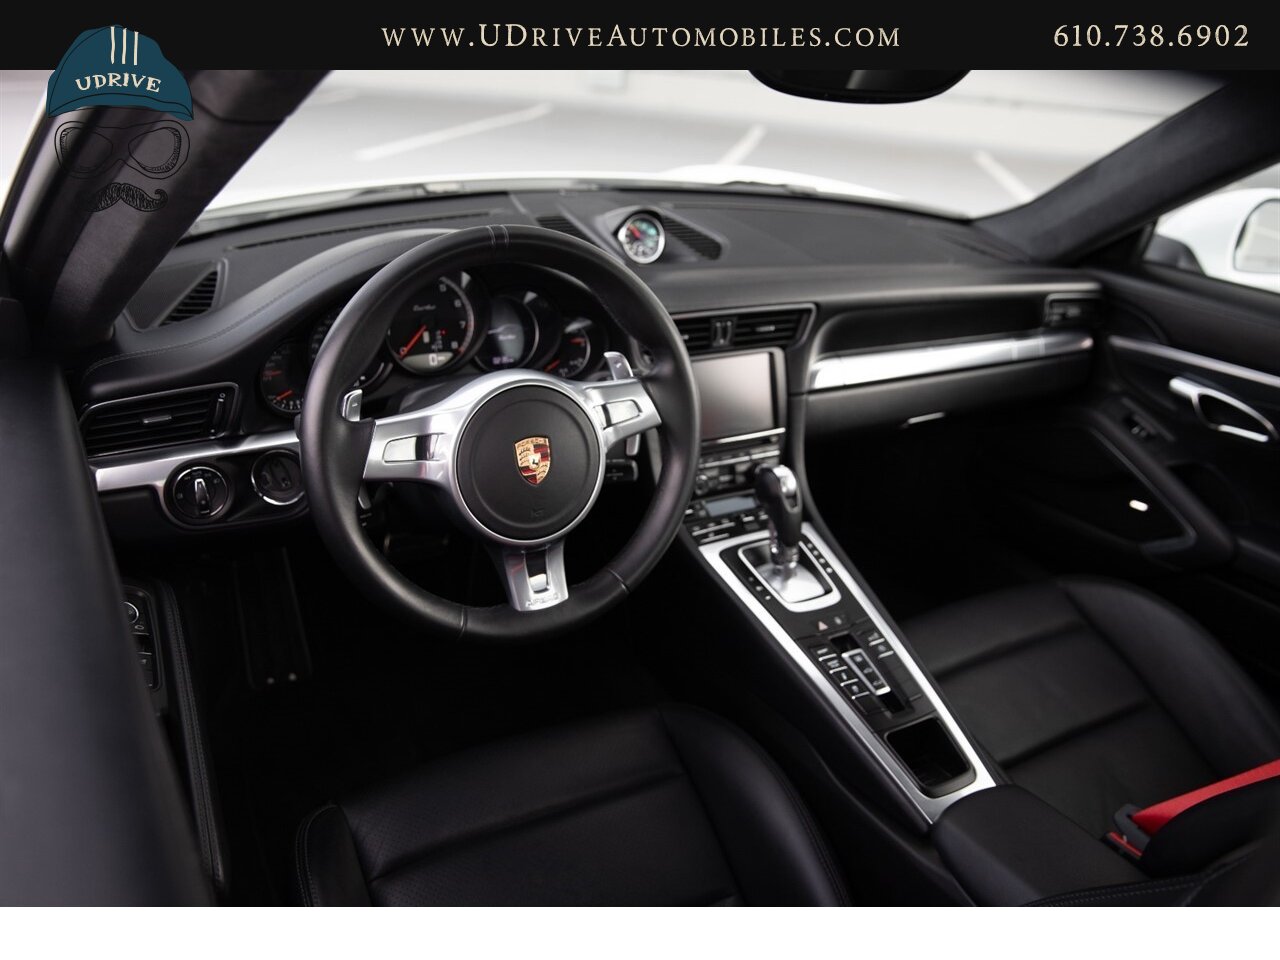 2014 Porsche 911 Turbo 12k Miles White over Black Chrono Rear Wiper  Sport Seats 20in Turbo Whls Sunroof Red Belts - Photo 26 - West Chester, PA 19382